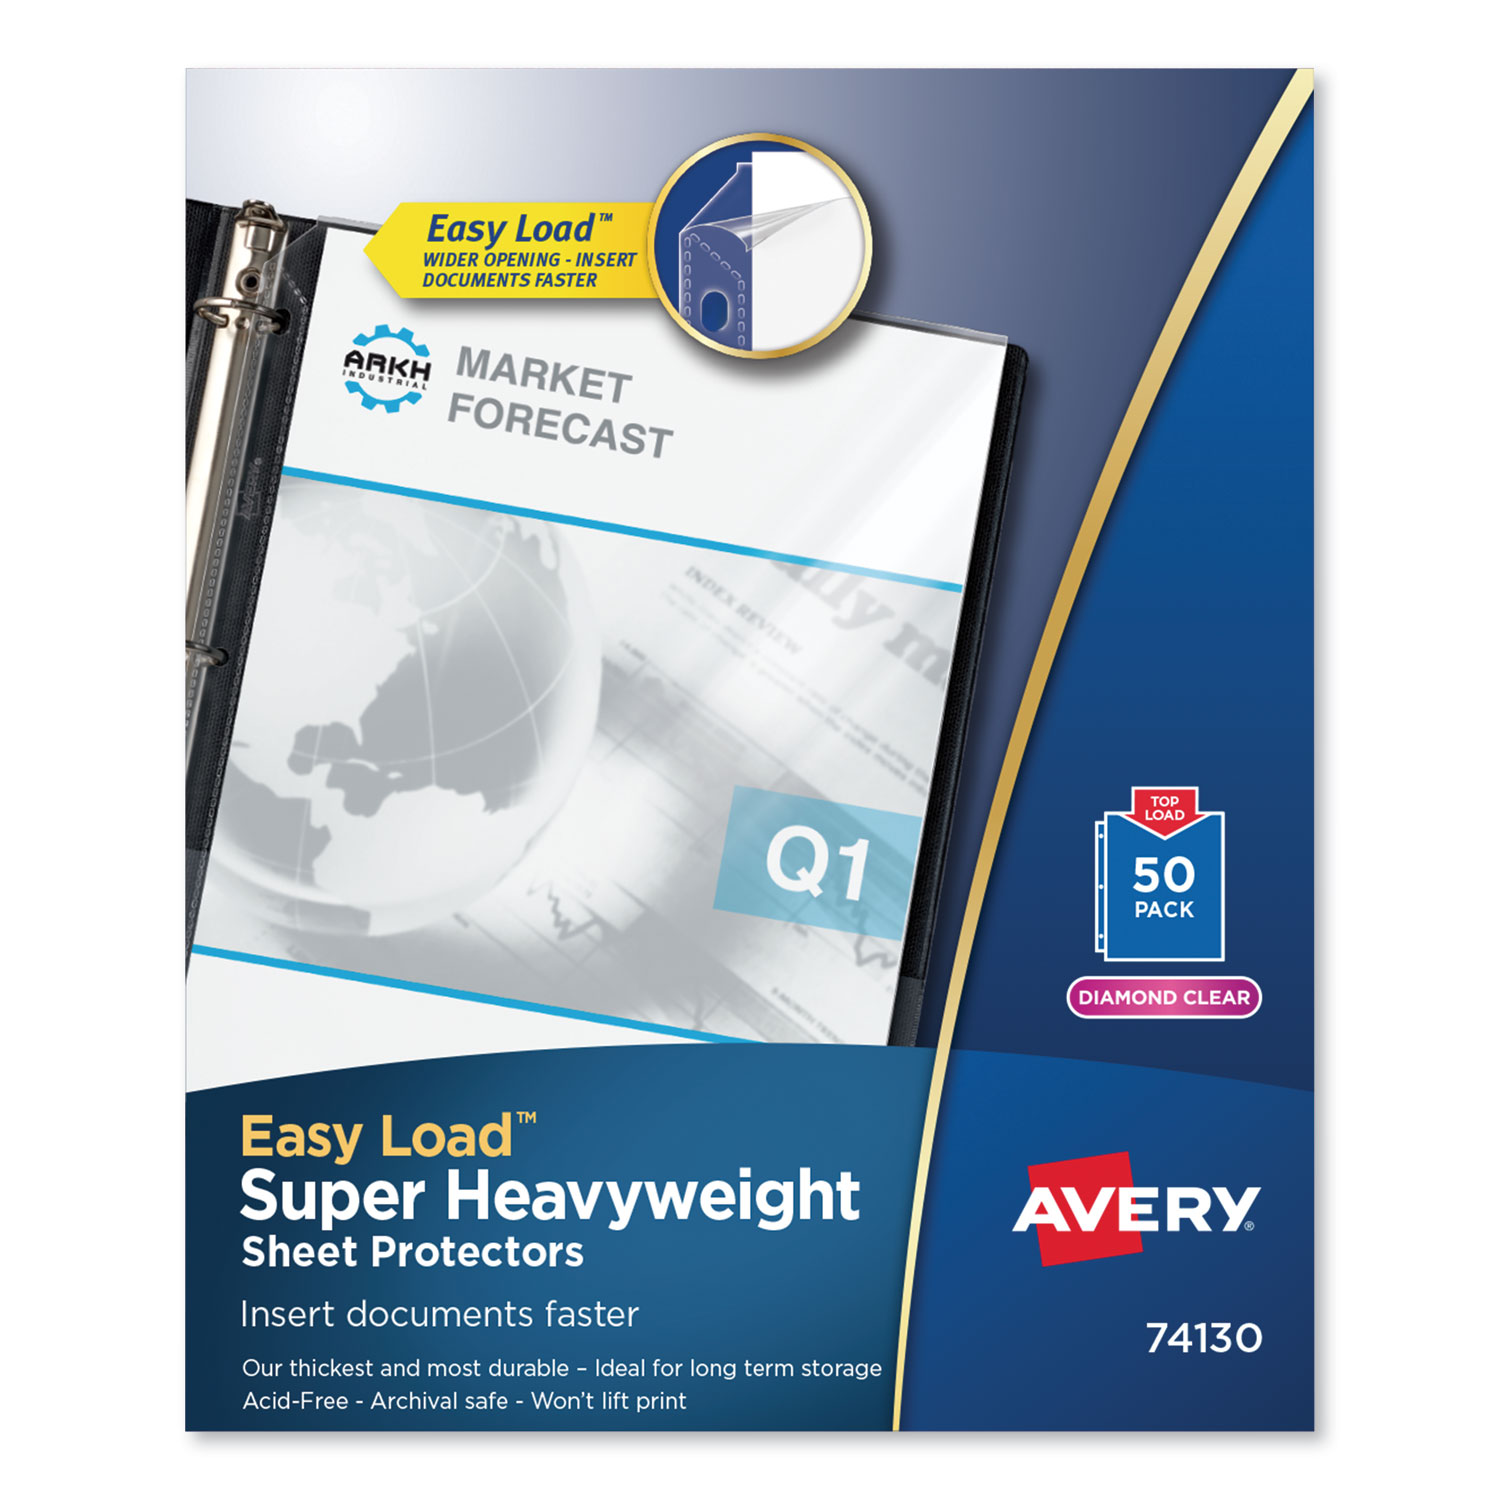  Avery 74130 Top-Load Poly Sheet Protector, Super Heavy Gauge, Letter, Diamond Clear, 50/Box (AVE74130) 